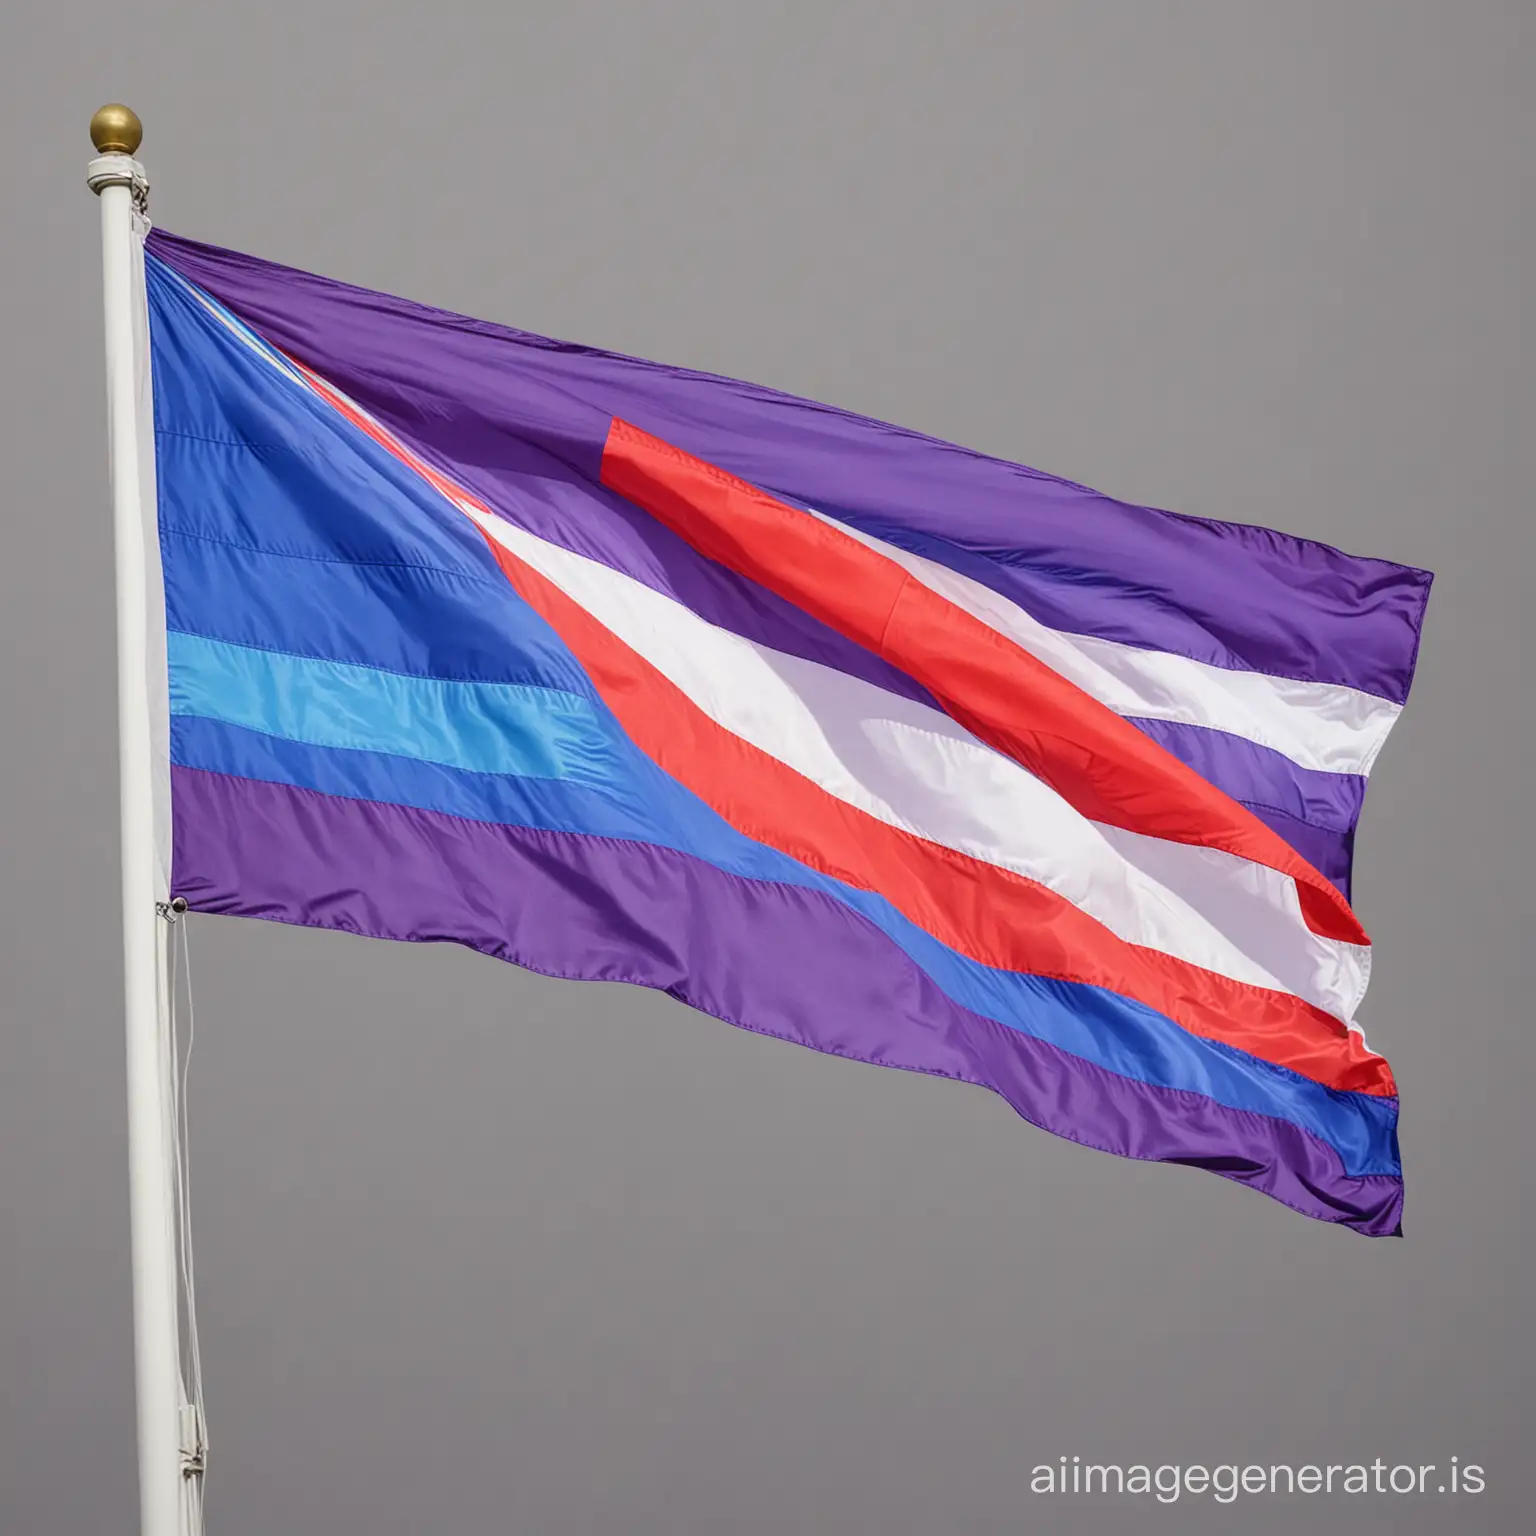 OBLONG FLAG
FILLED WITH RED, BLUE, PURPLE,
COLOUR STRIPS
